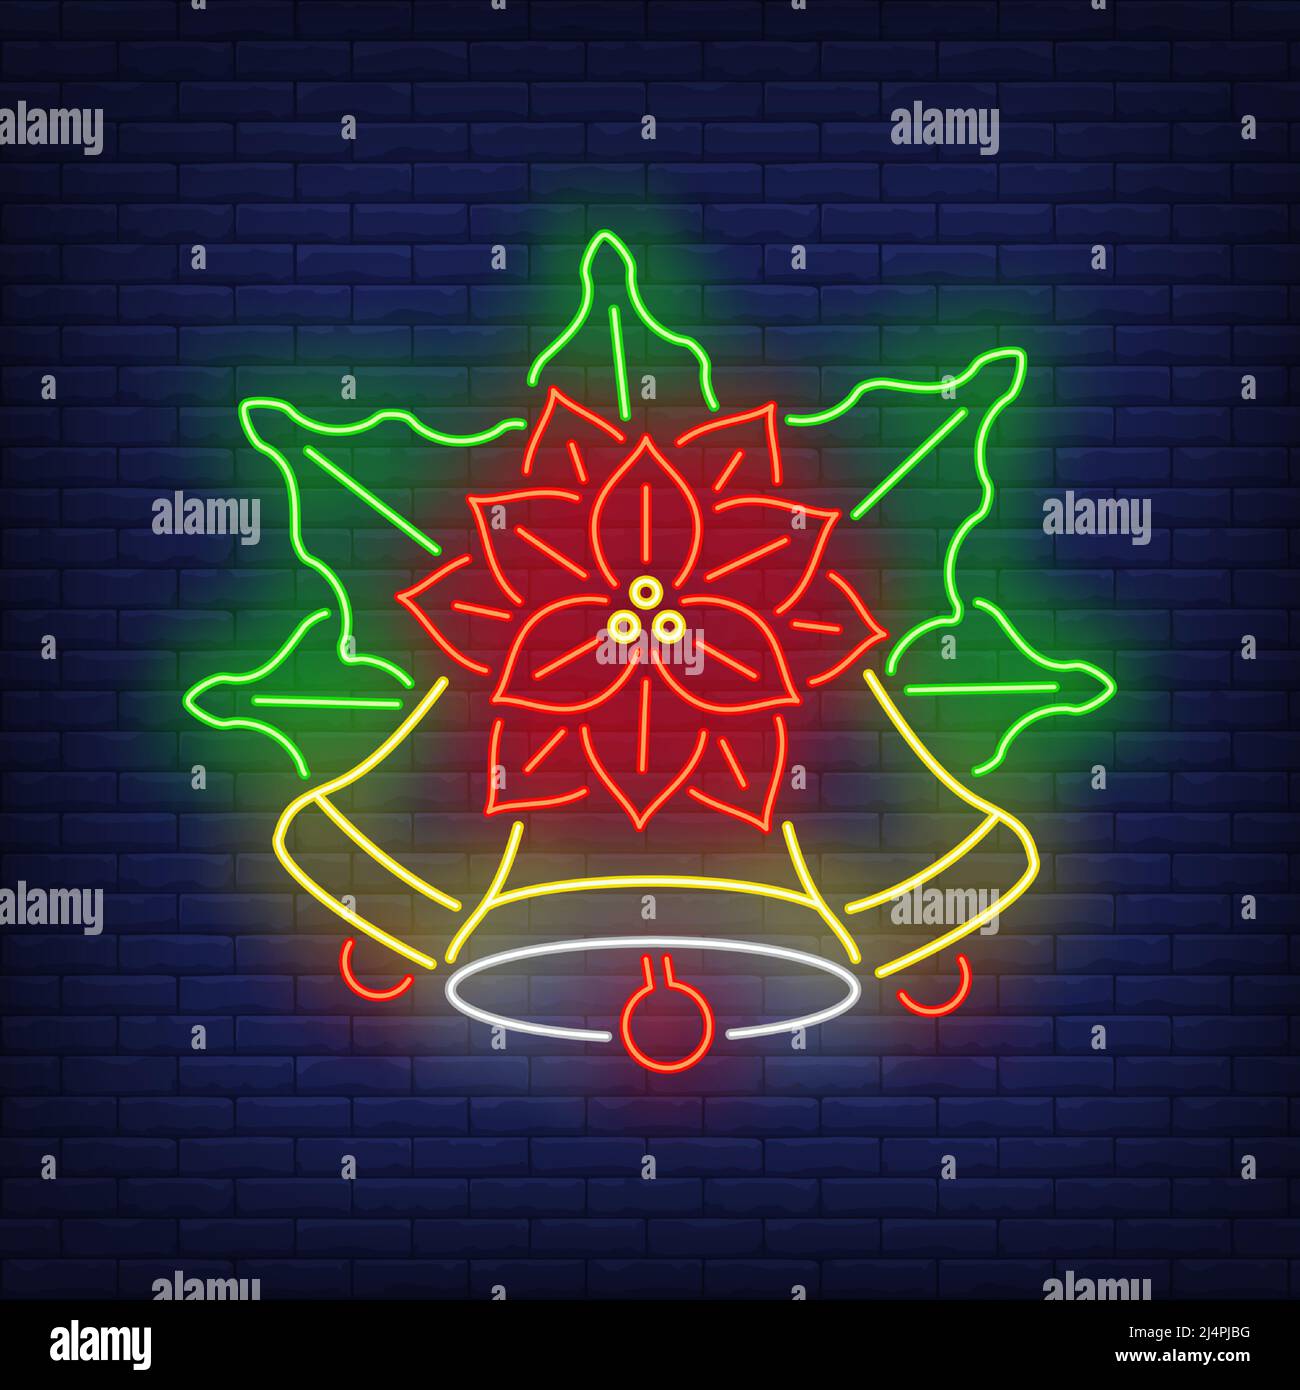 Christmas bells neon icon on light background Vector Image